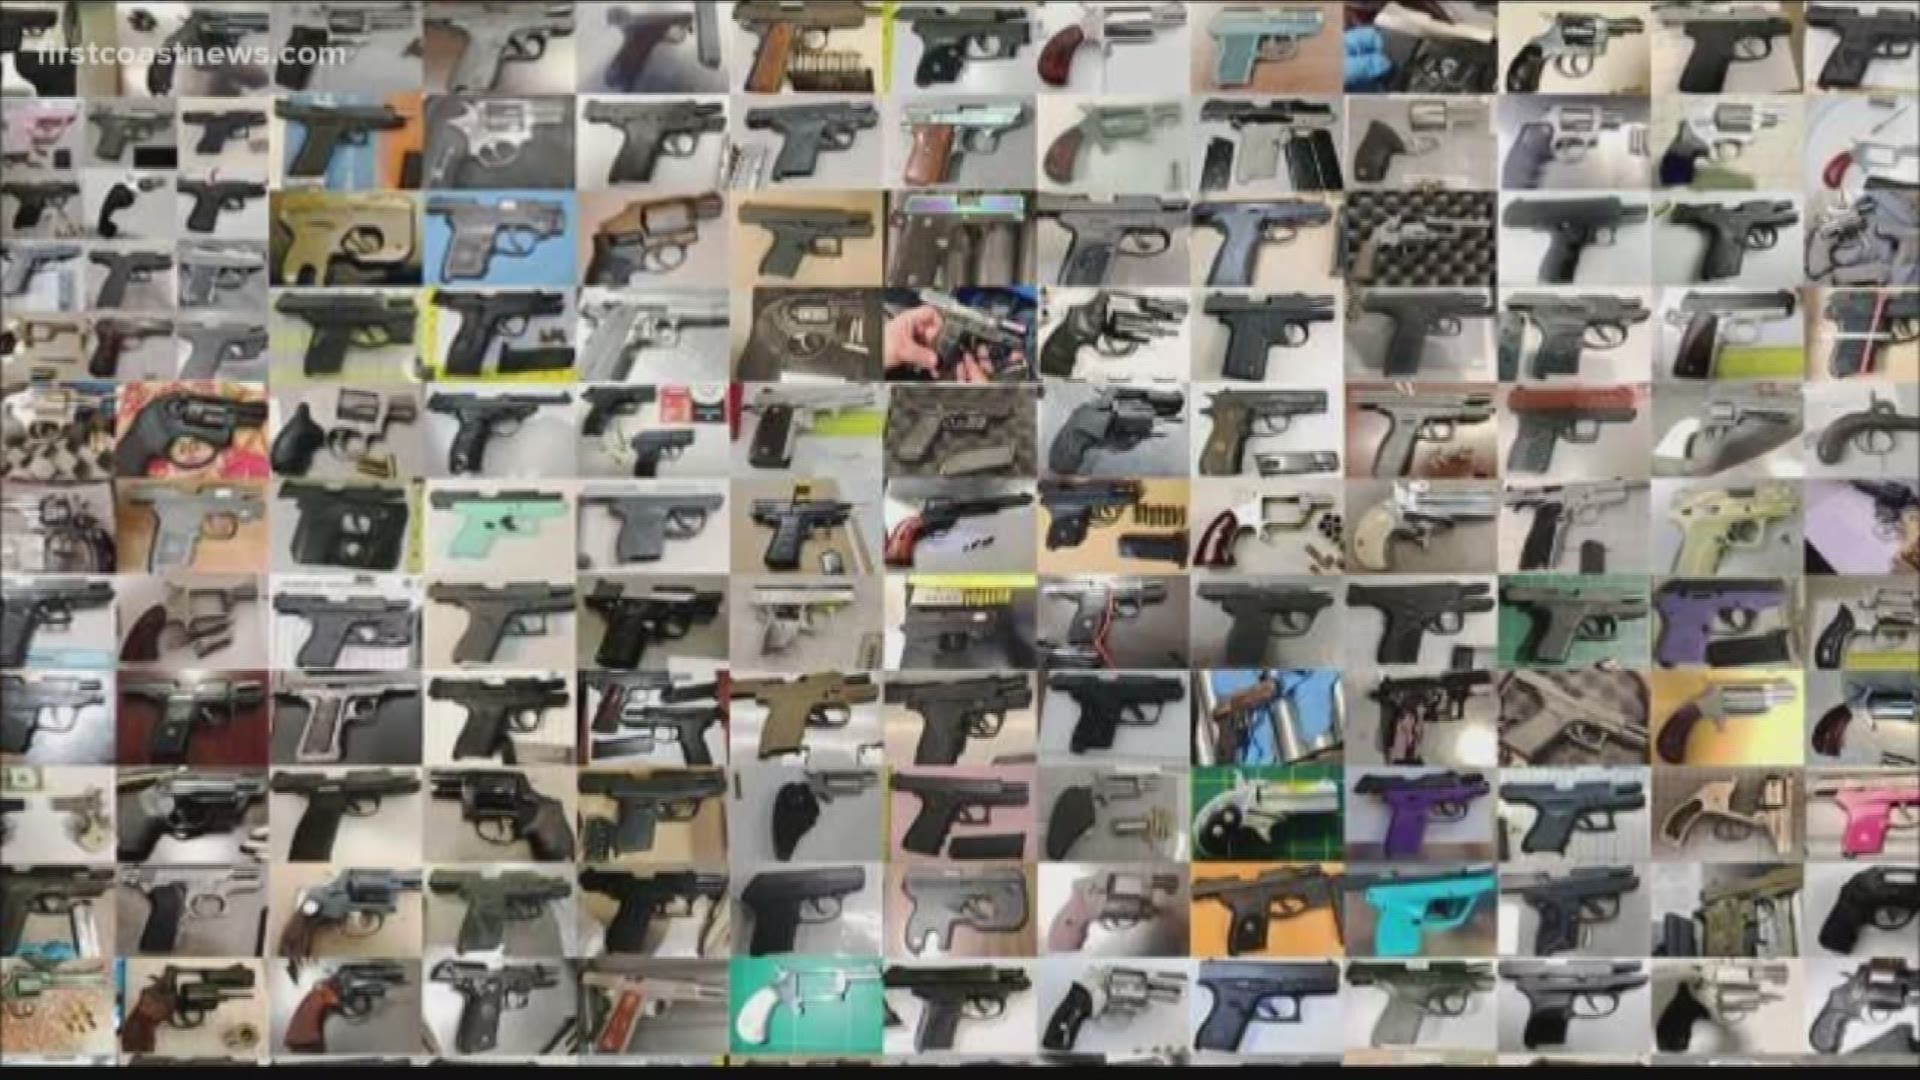 A record number of guns found at American airports in 2019 according to the Transportation Security Administration’s latest report.